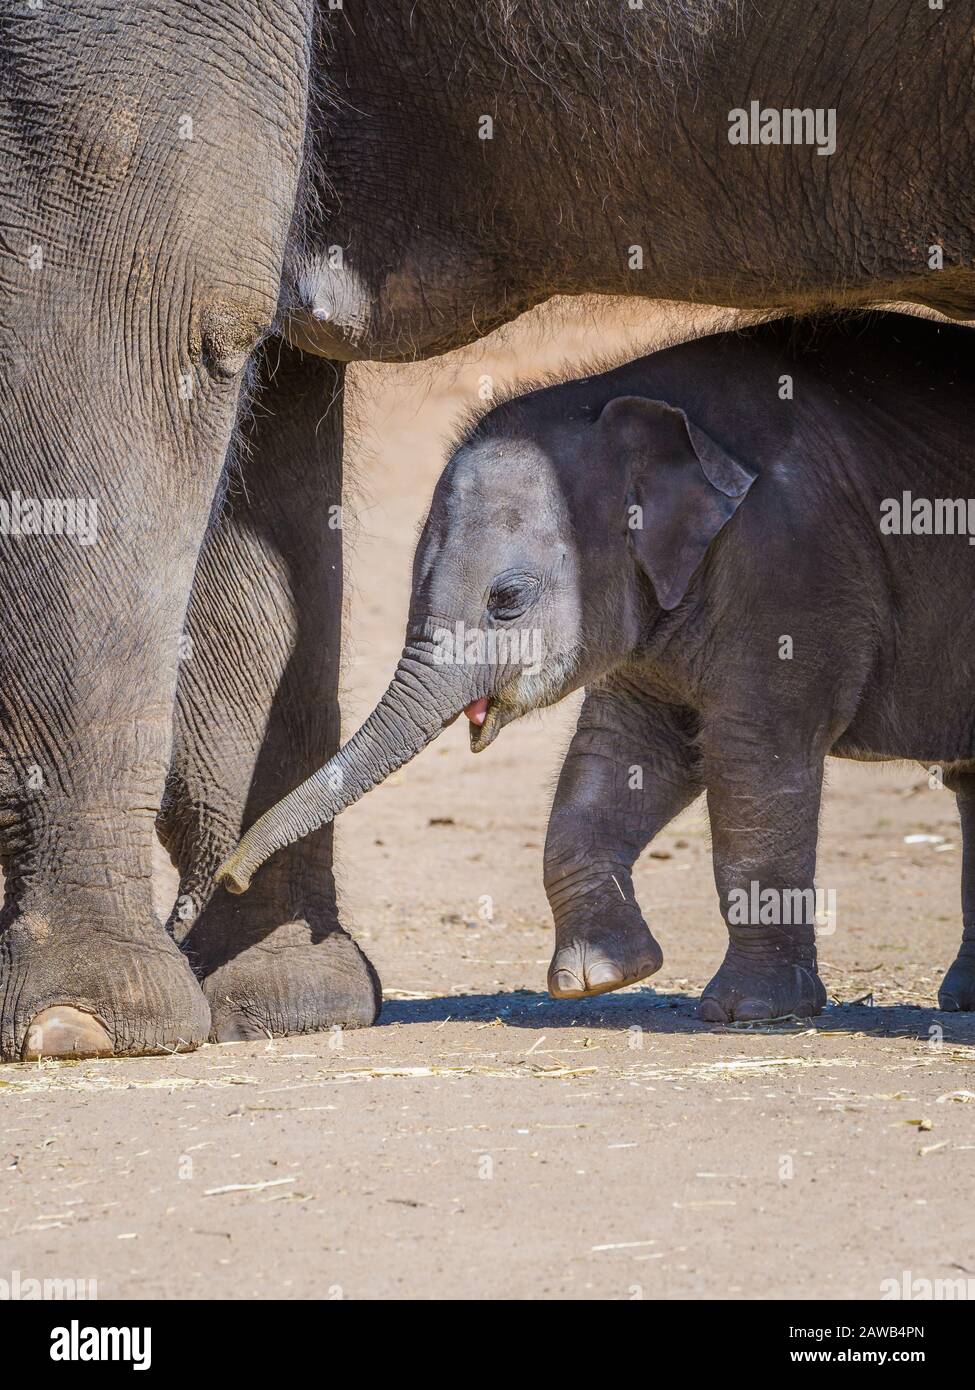 Newborn asiatic elephant calf seeking protection and comfort between the legs of its mother at Dubbo's Western Plains Zoo in Australia. Stock Photo